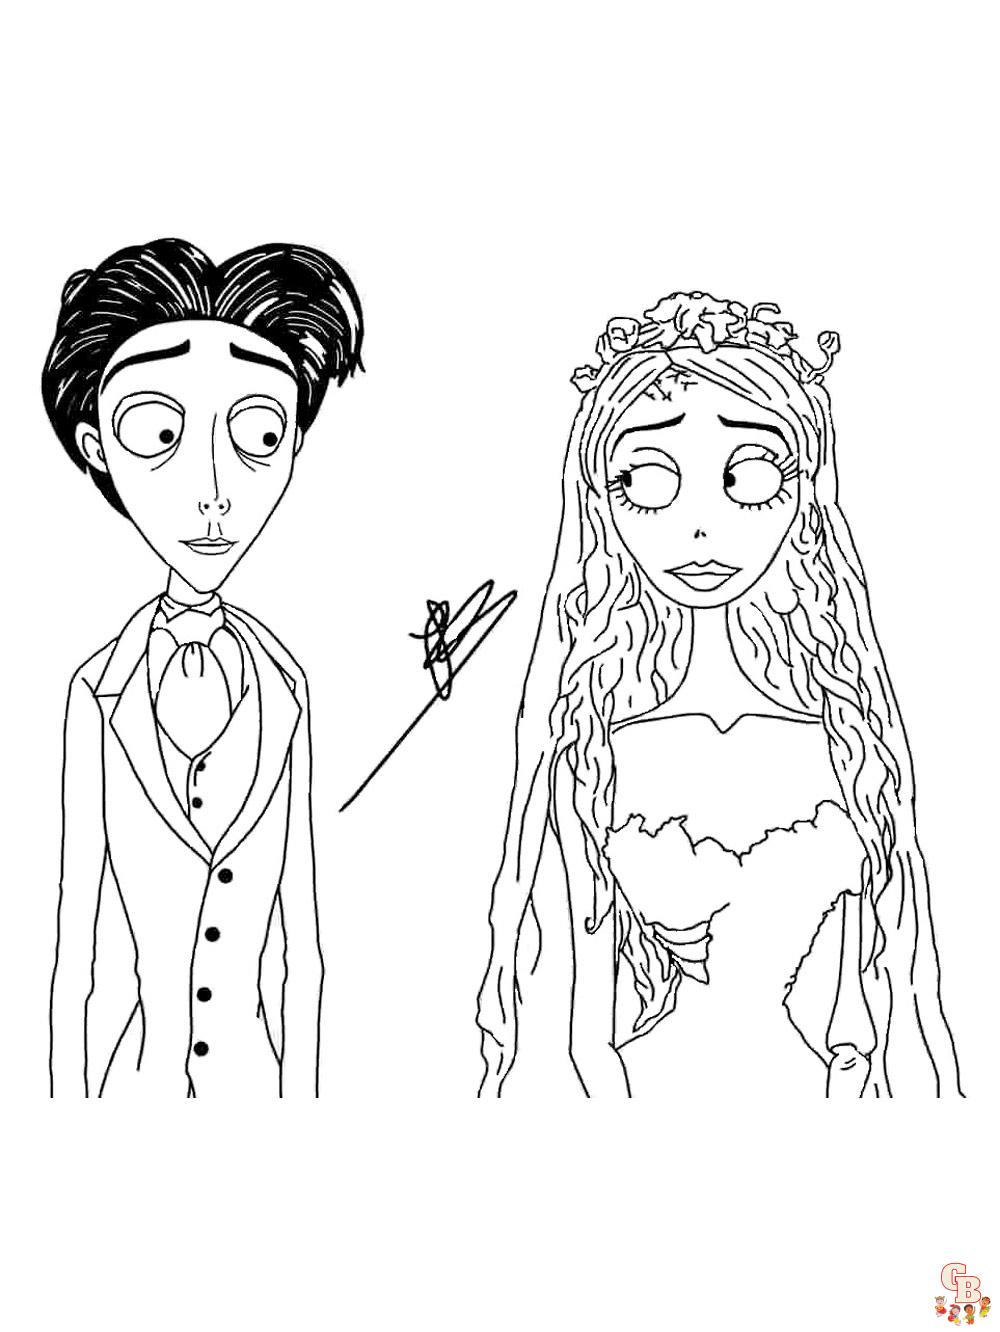 Corpse Bride Coloring Pages Free Printable Sheets For Kids